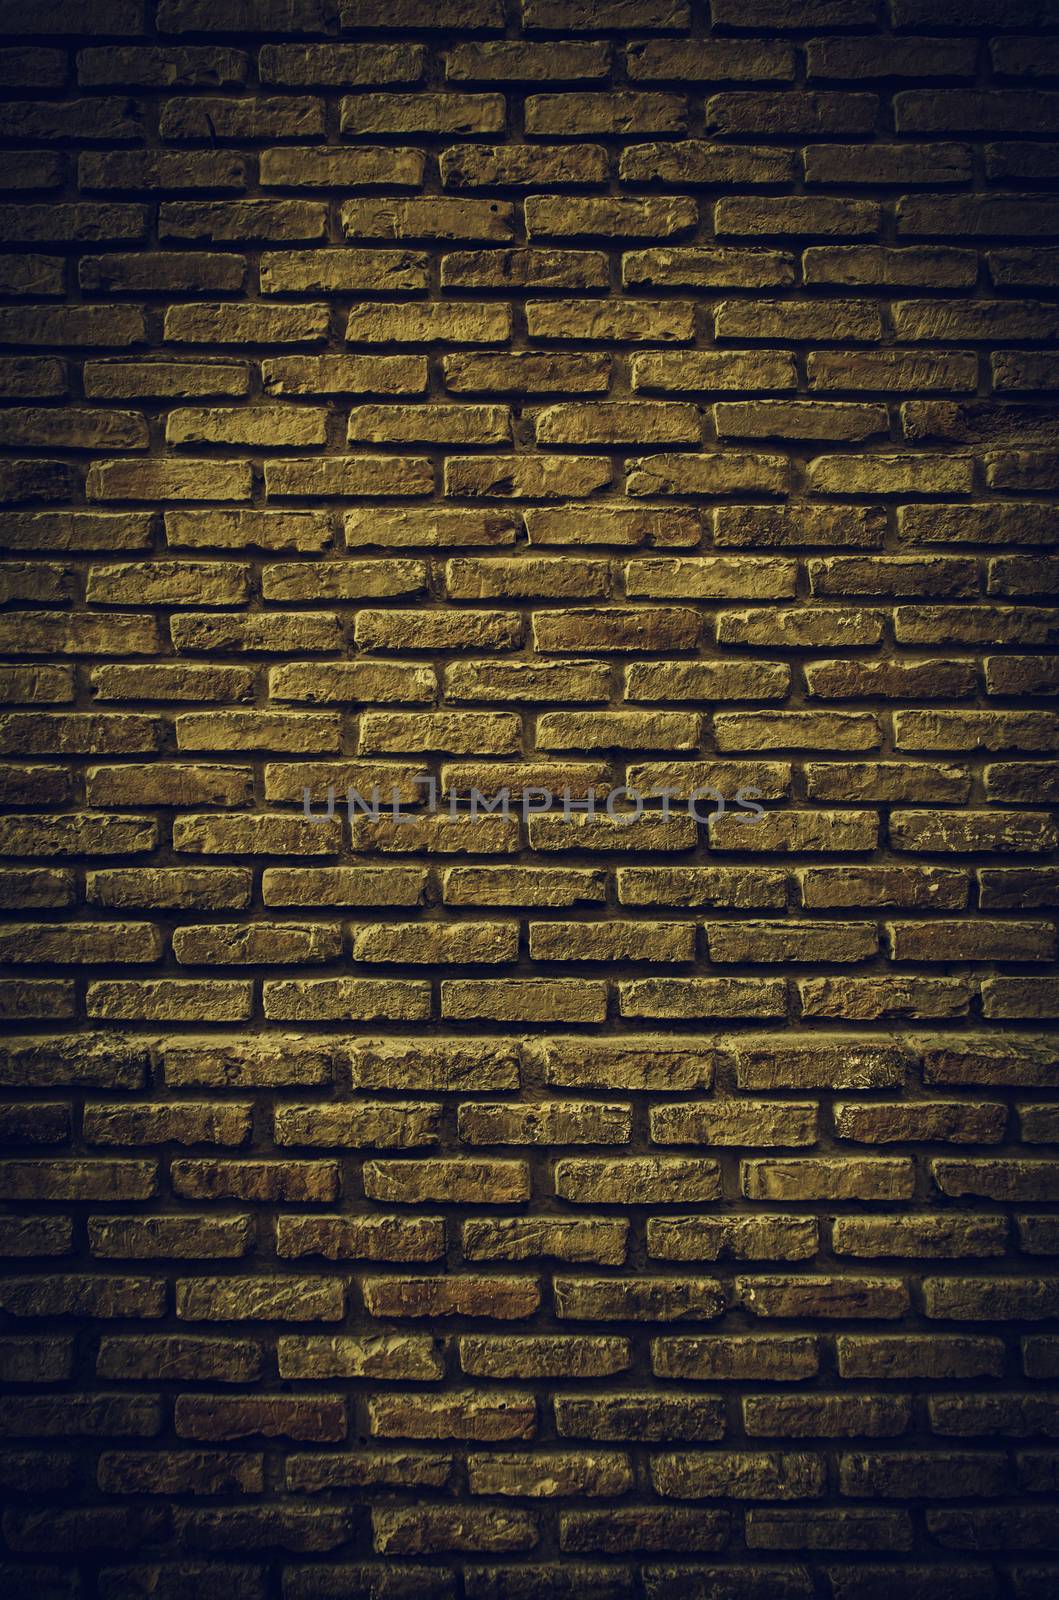 Fund damaged brick wall, detail of old bricks in the city, textured background